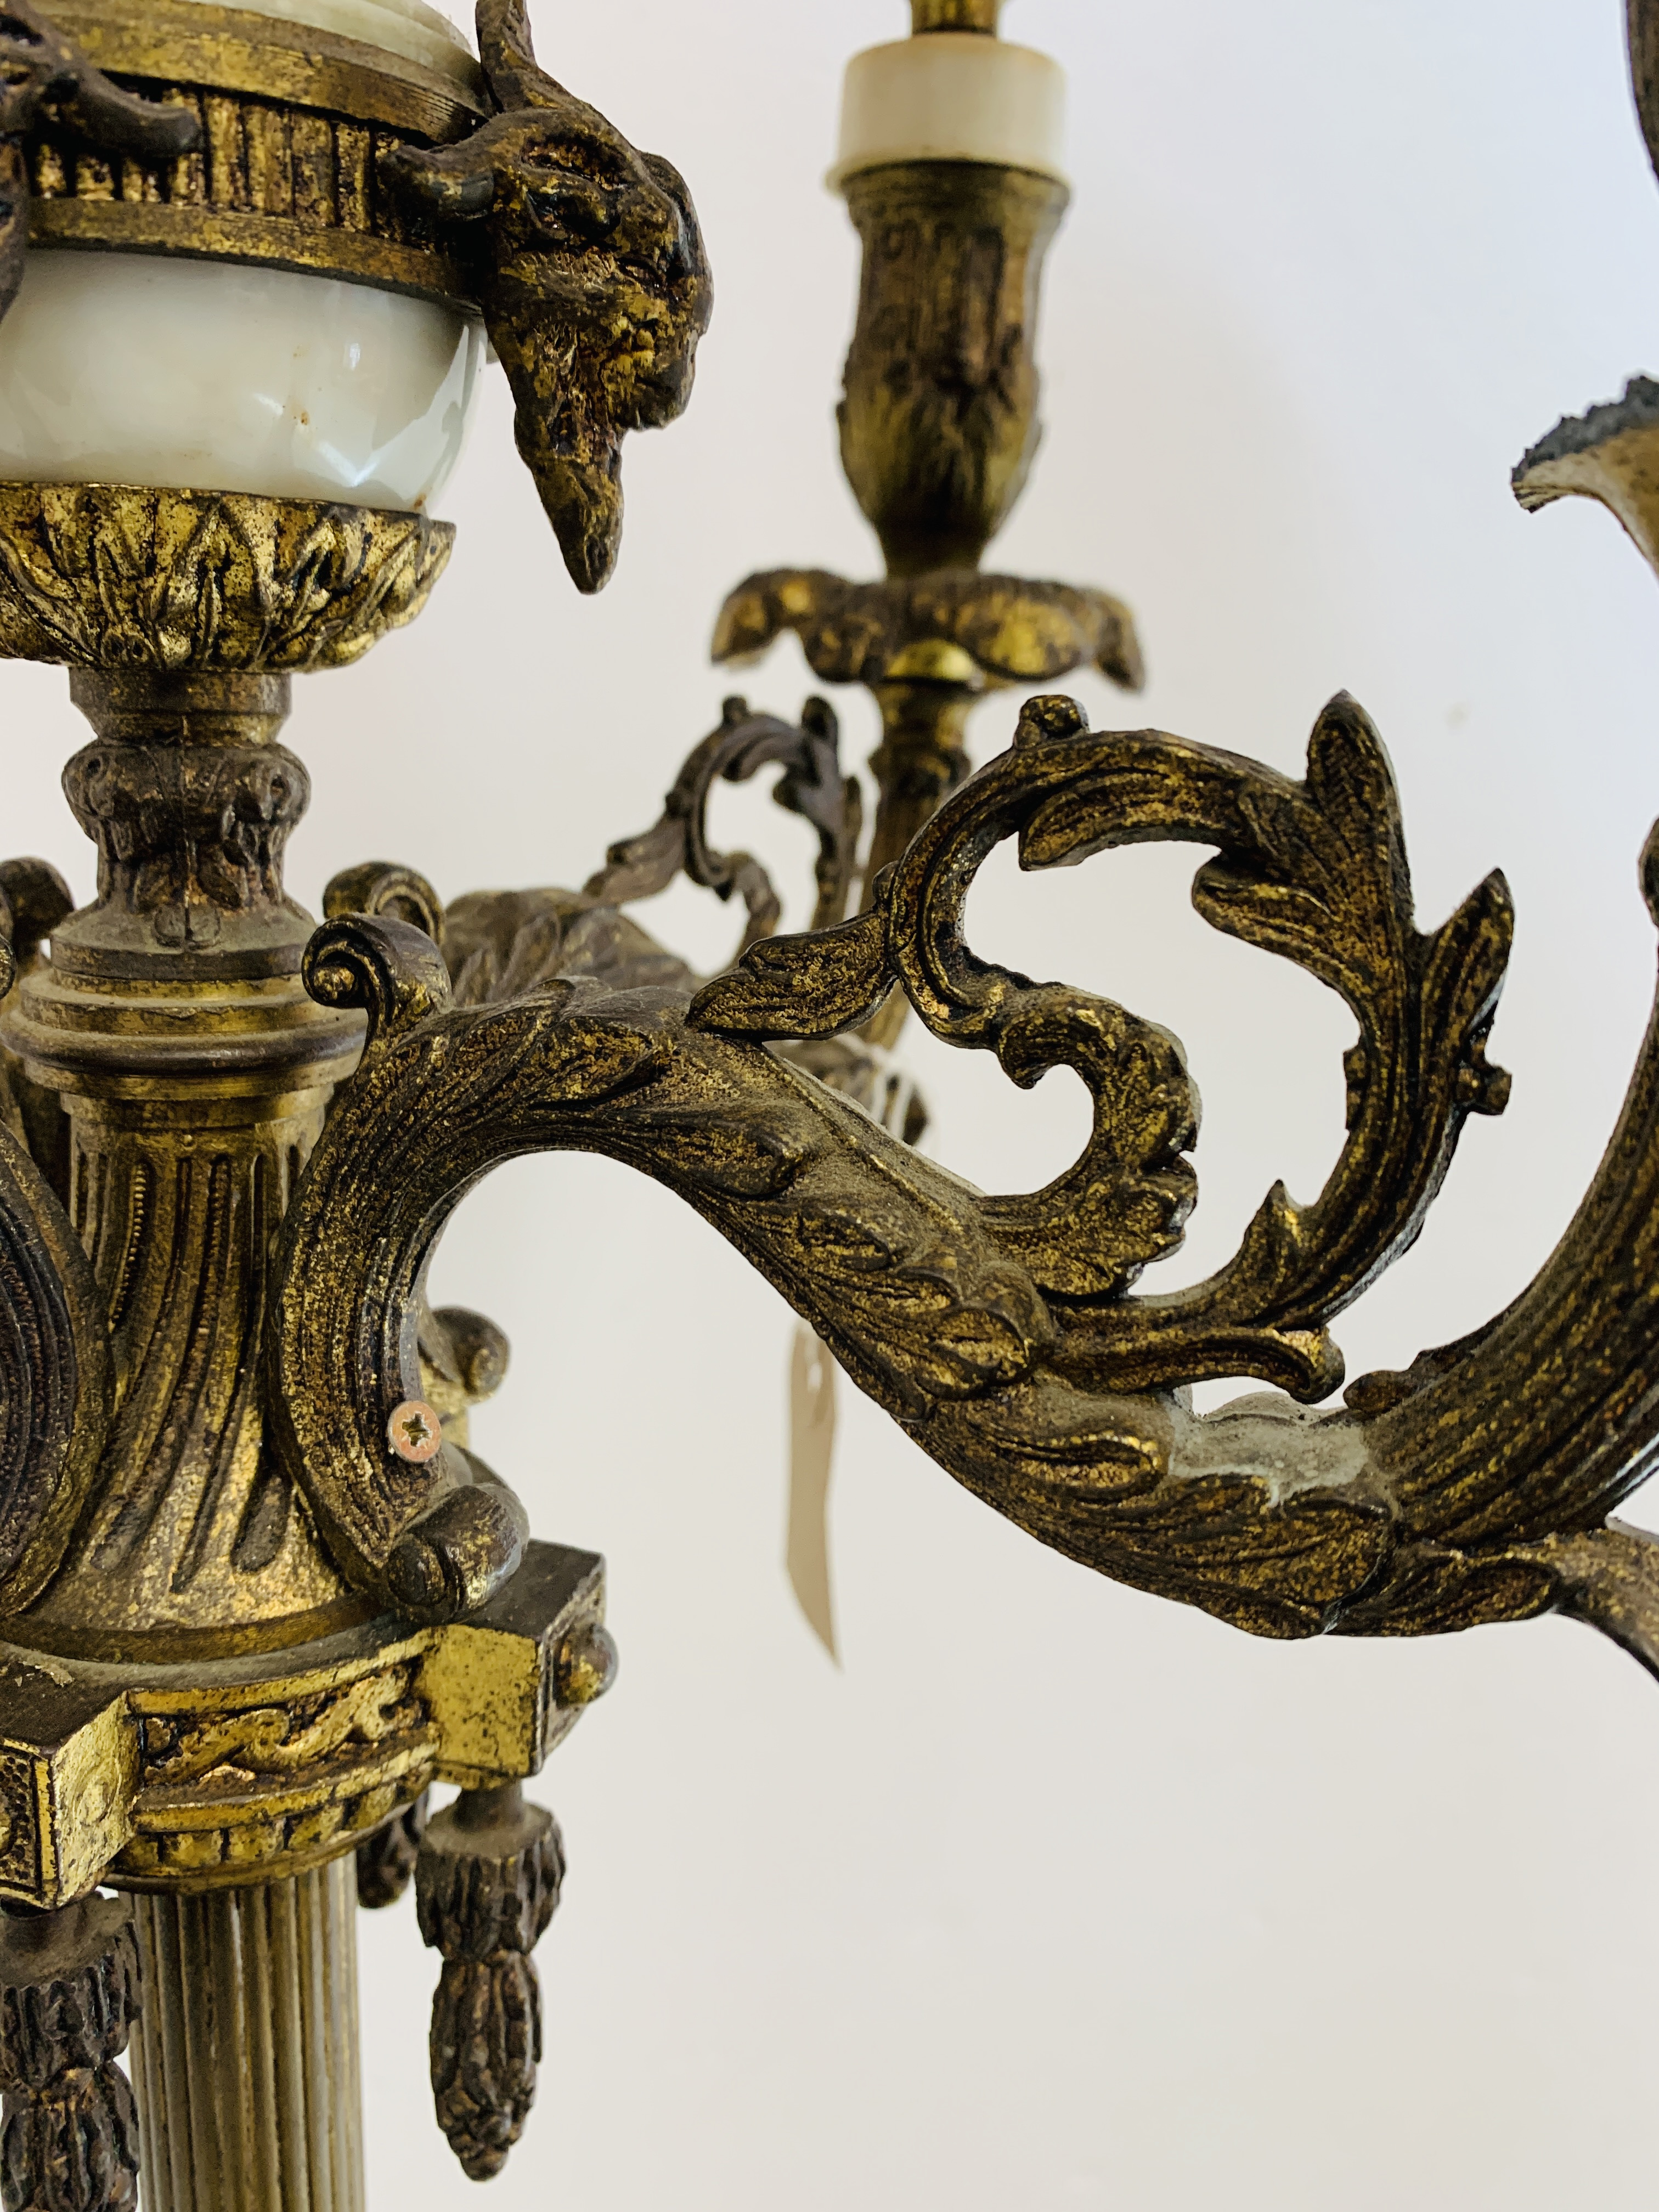 A CORINTHIAN COLUMN FLOOR STANDING FIVE BRANCH LAMP STANDARD THE BASE WITH MARBLE PLATFORM AND CLAW - Image 7 of 12